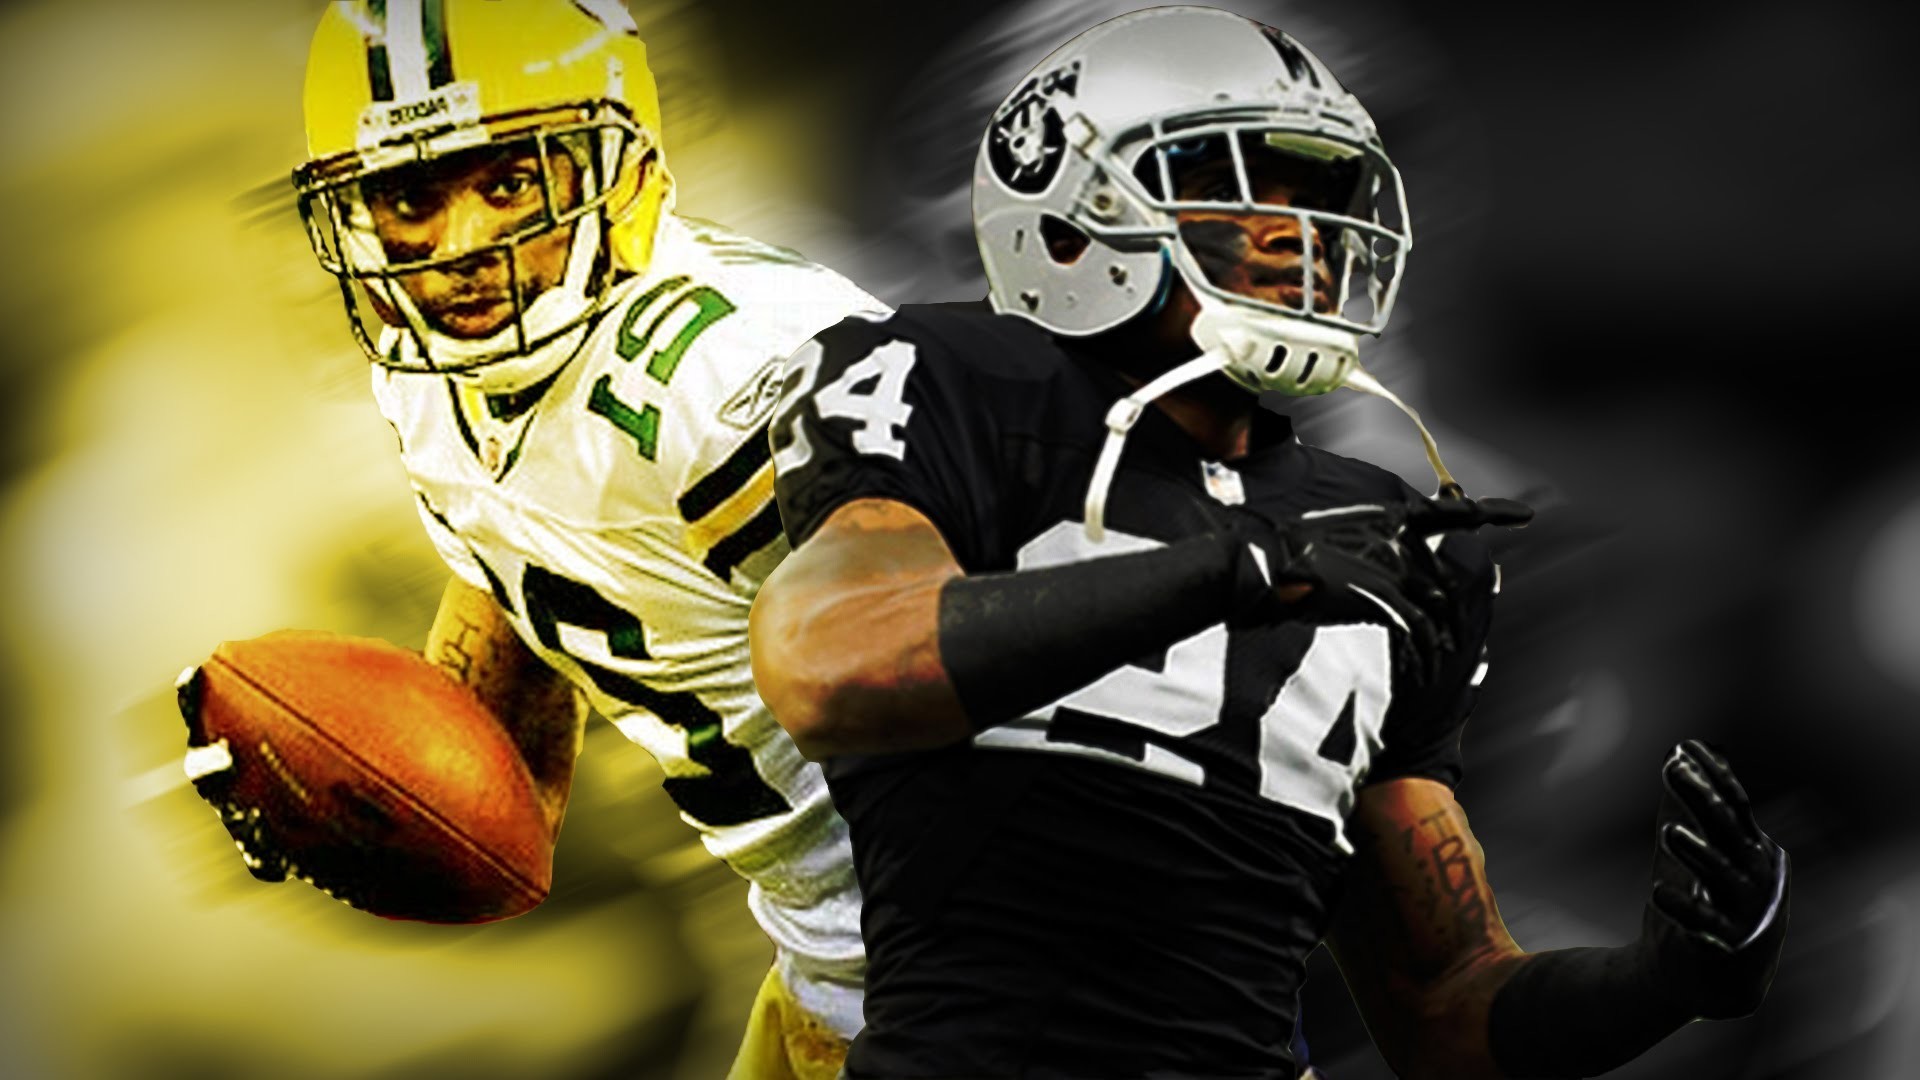 1920x1080, Here At Xshyfc - Charles Woodson Packers Raiders - HD Wallpaper 